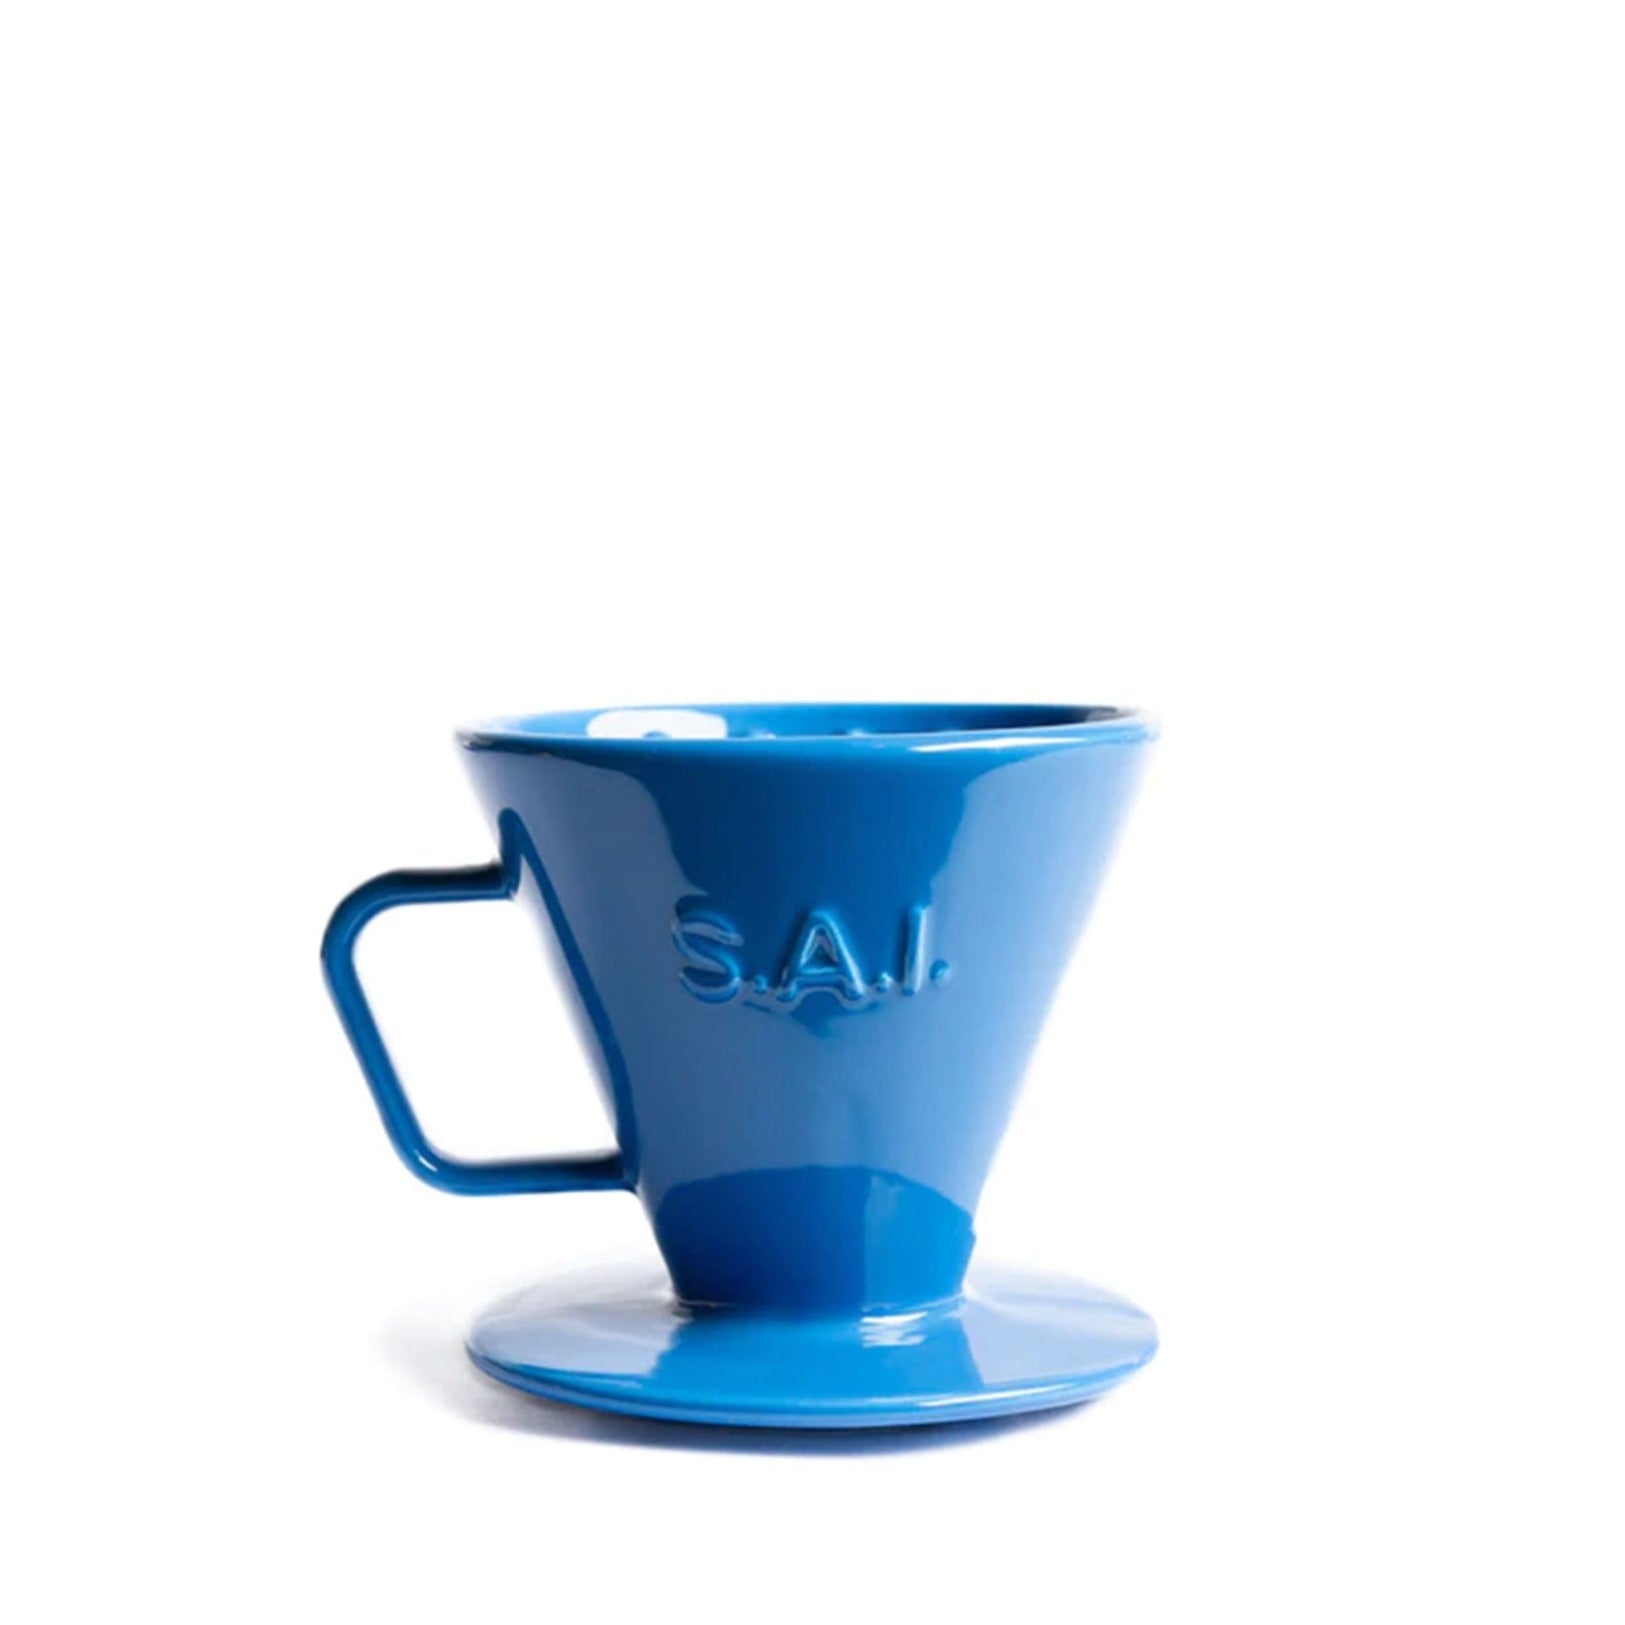 SAI C70 Ceramic Pourover BrewerSAI C70 Ceramic Pourover BrewerCollective Coffee RoastersThe C70 is Saint Anthony Industries design progression of the standard ceramic pourover we have always enjoyed. Complete with the utilitarian performance of ceramic 